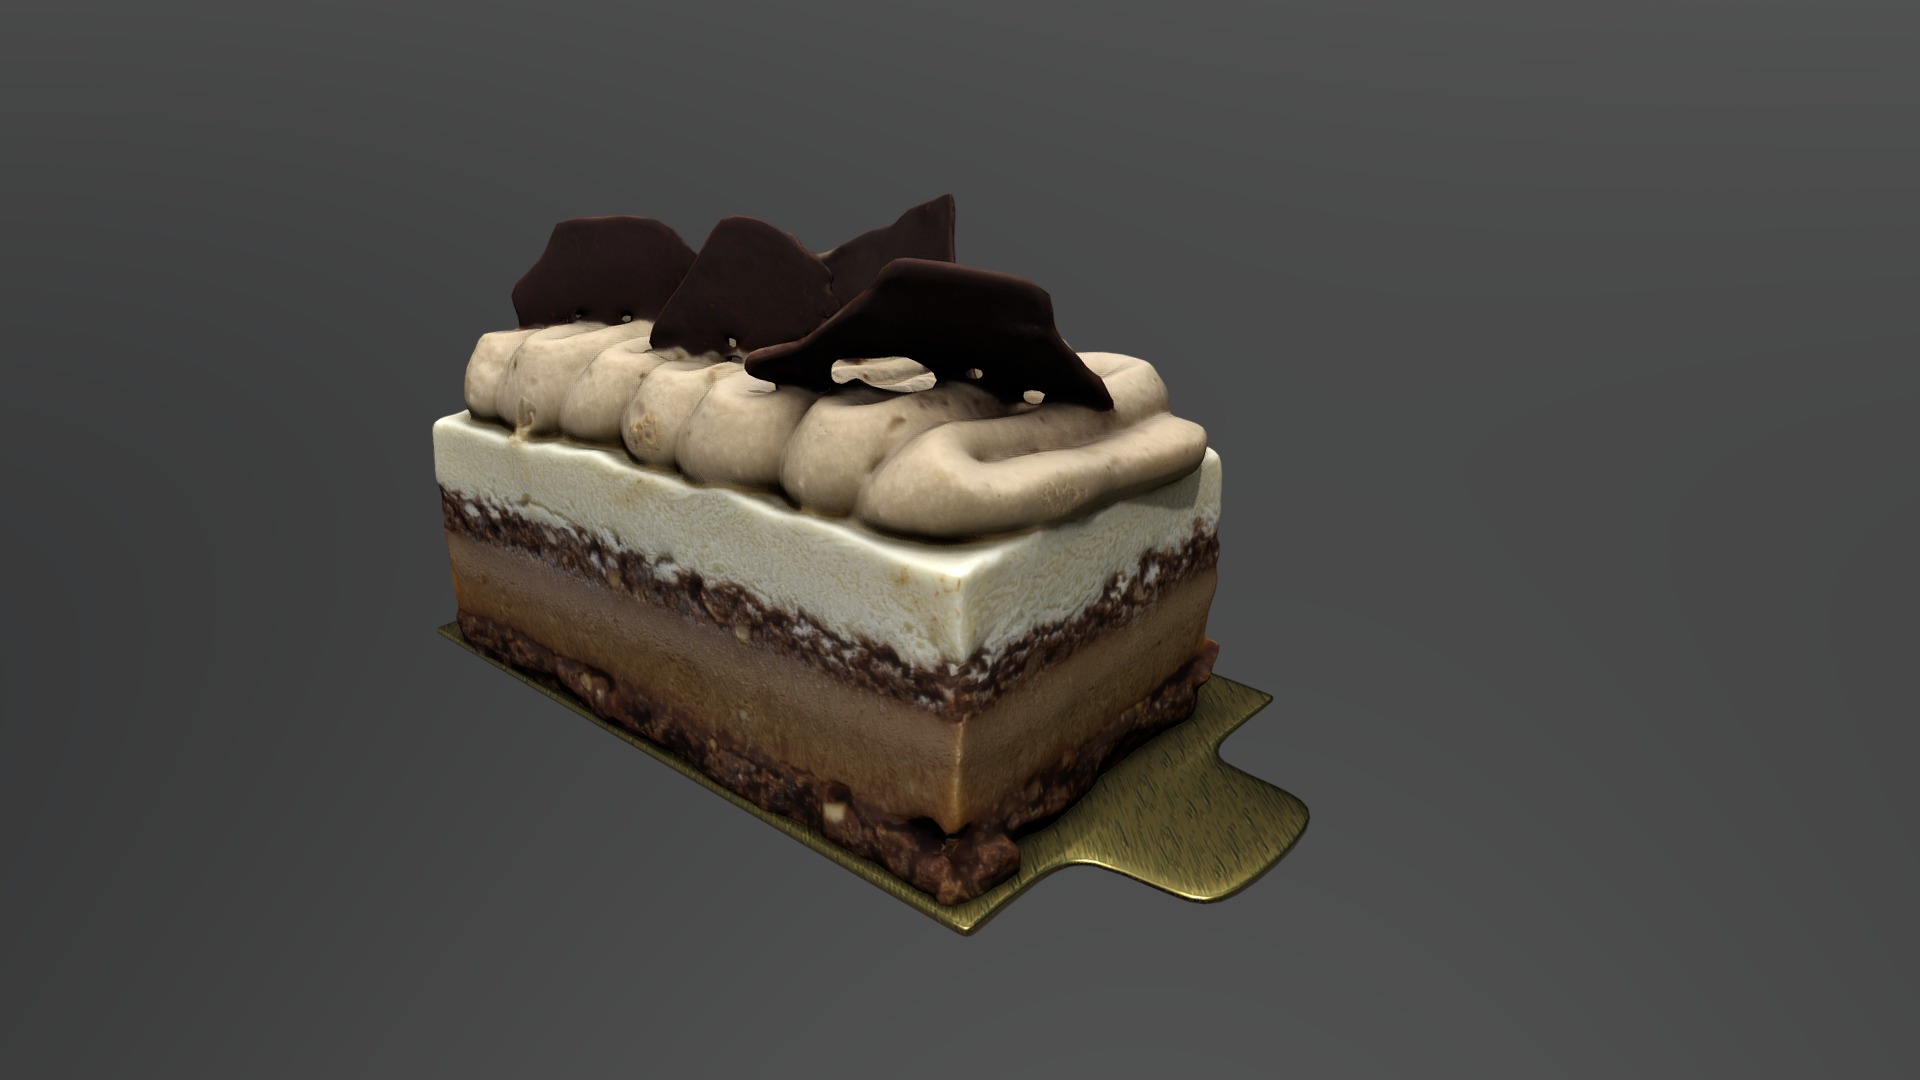 3D model 3PIG - This is a 3D model of the 3PIG. The 3D model is about a cake with chocolate frosting.